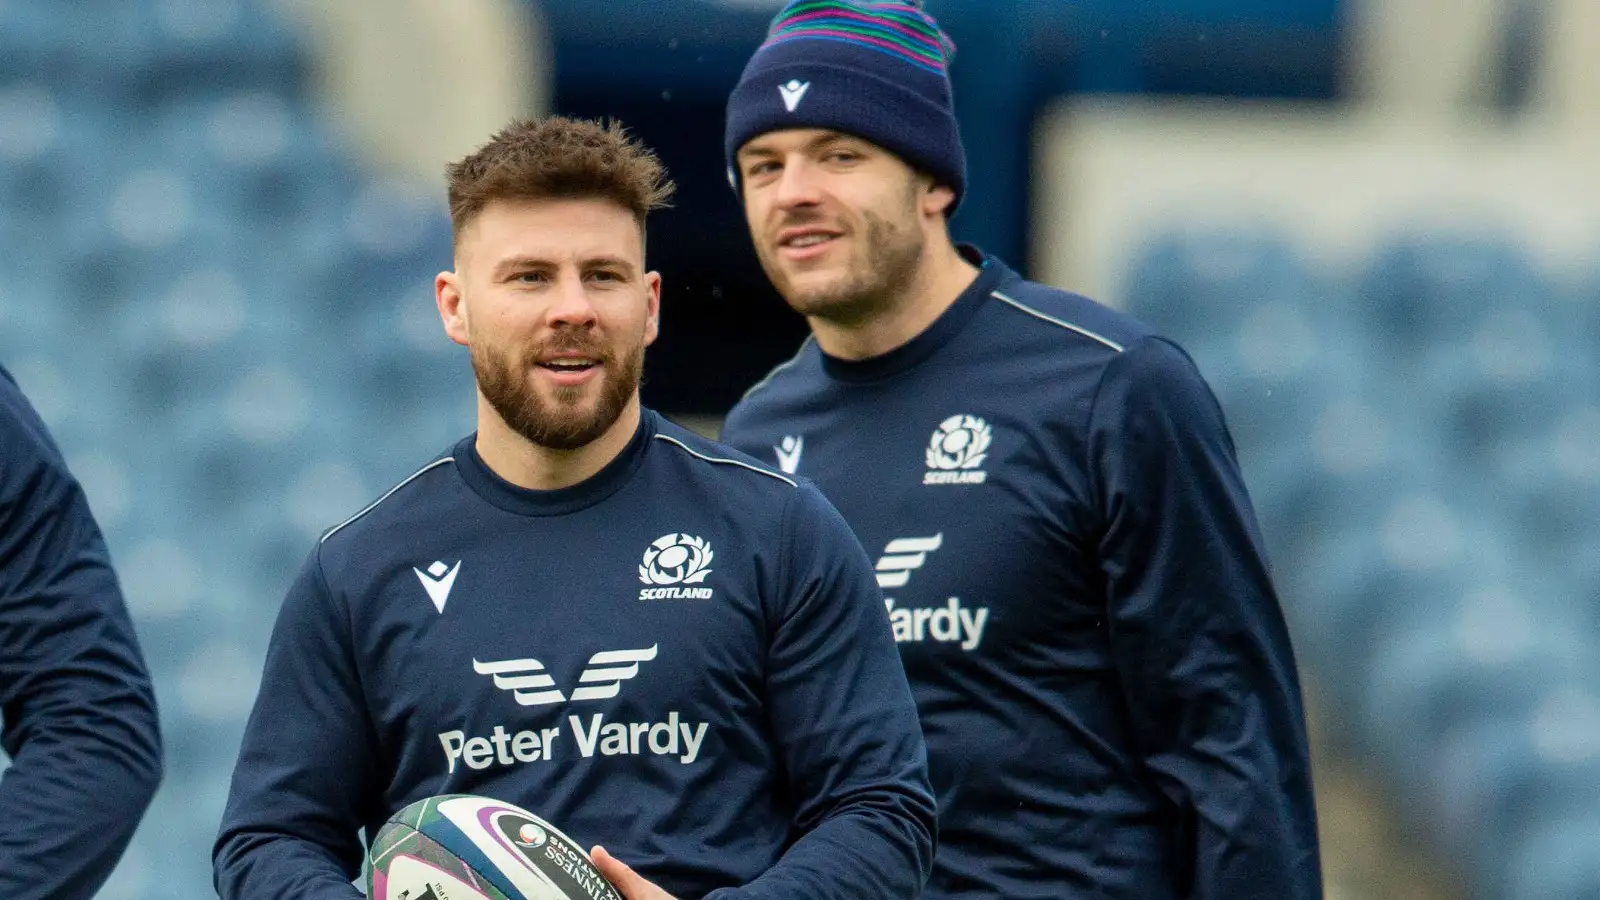 State of the Nation: Scotland's inconsistencies, Russell's jersey